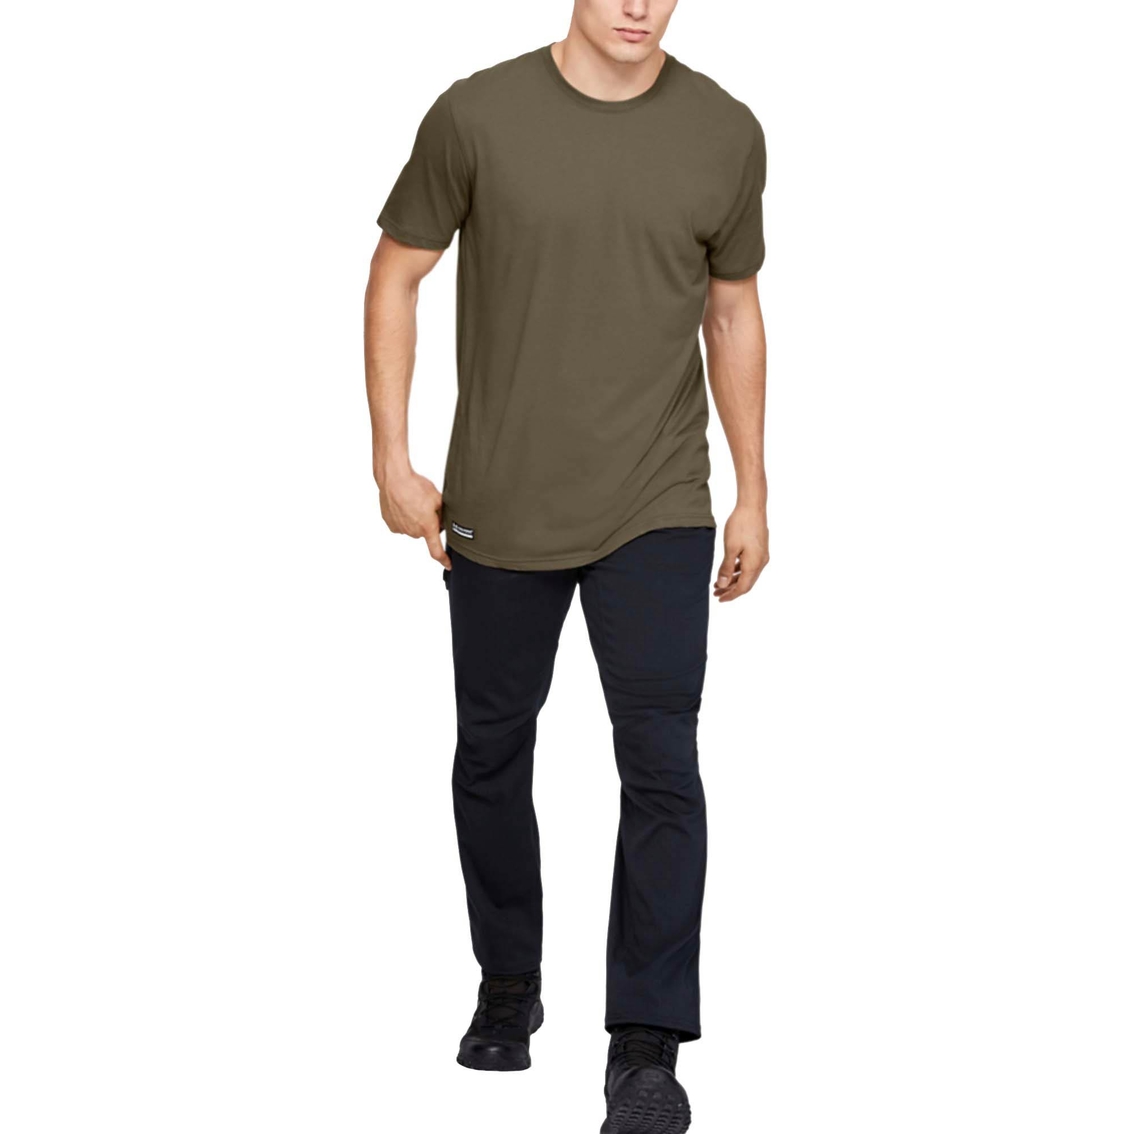 Under Armour M Tac Cotton Tee - Image 4 of 6